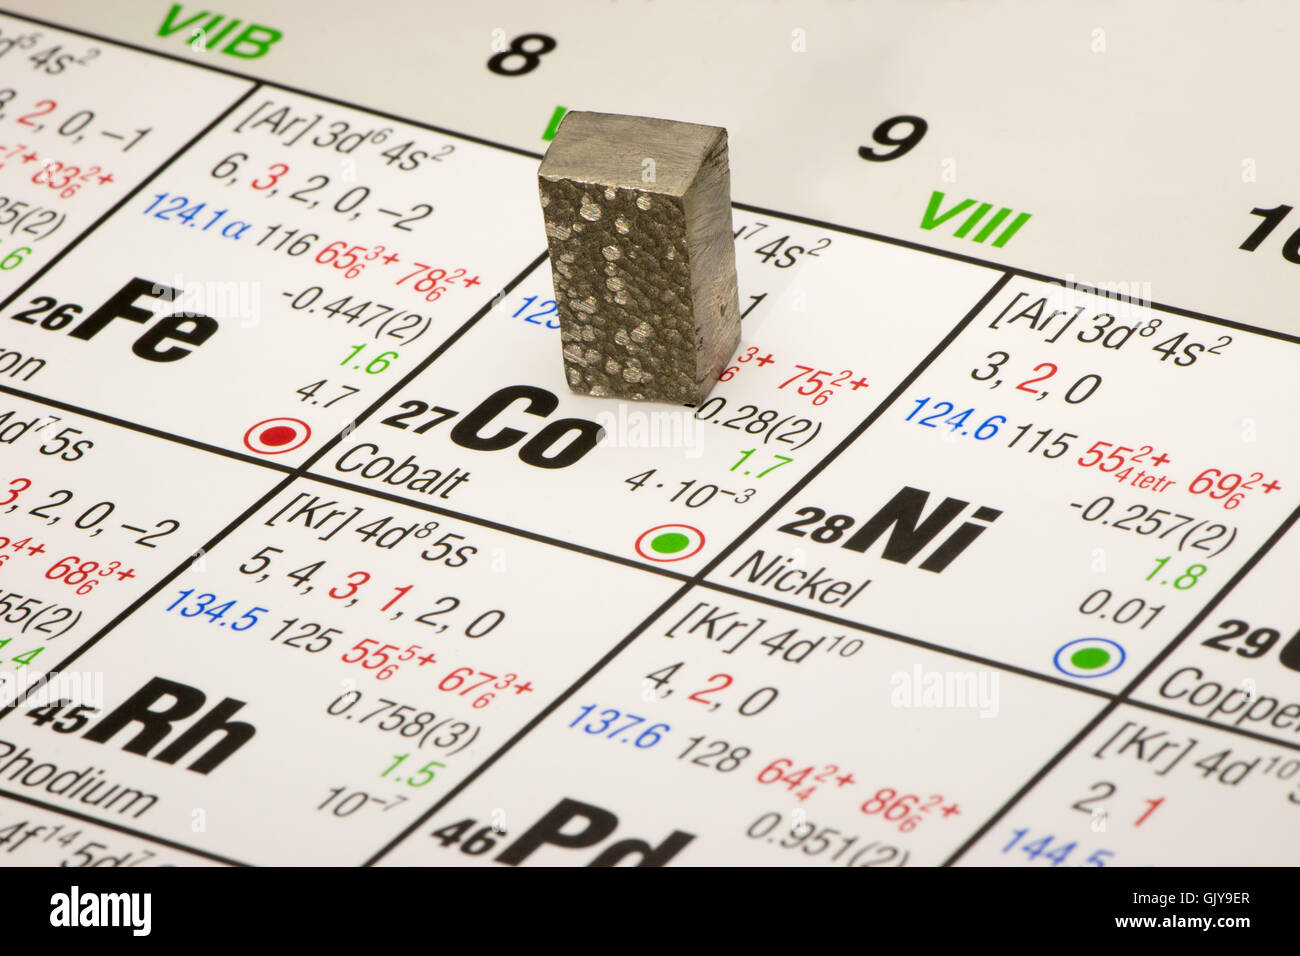 cobalt placed on periodic table of elements Stock Photo